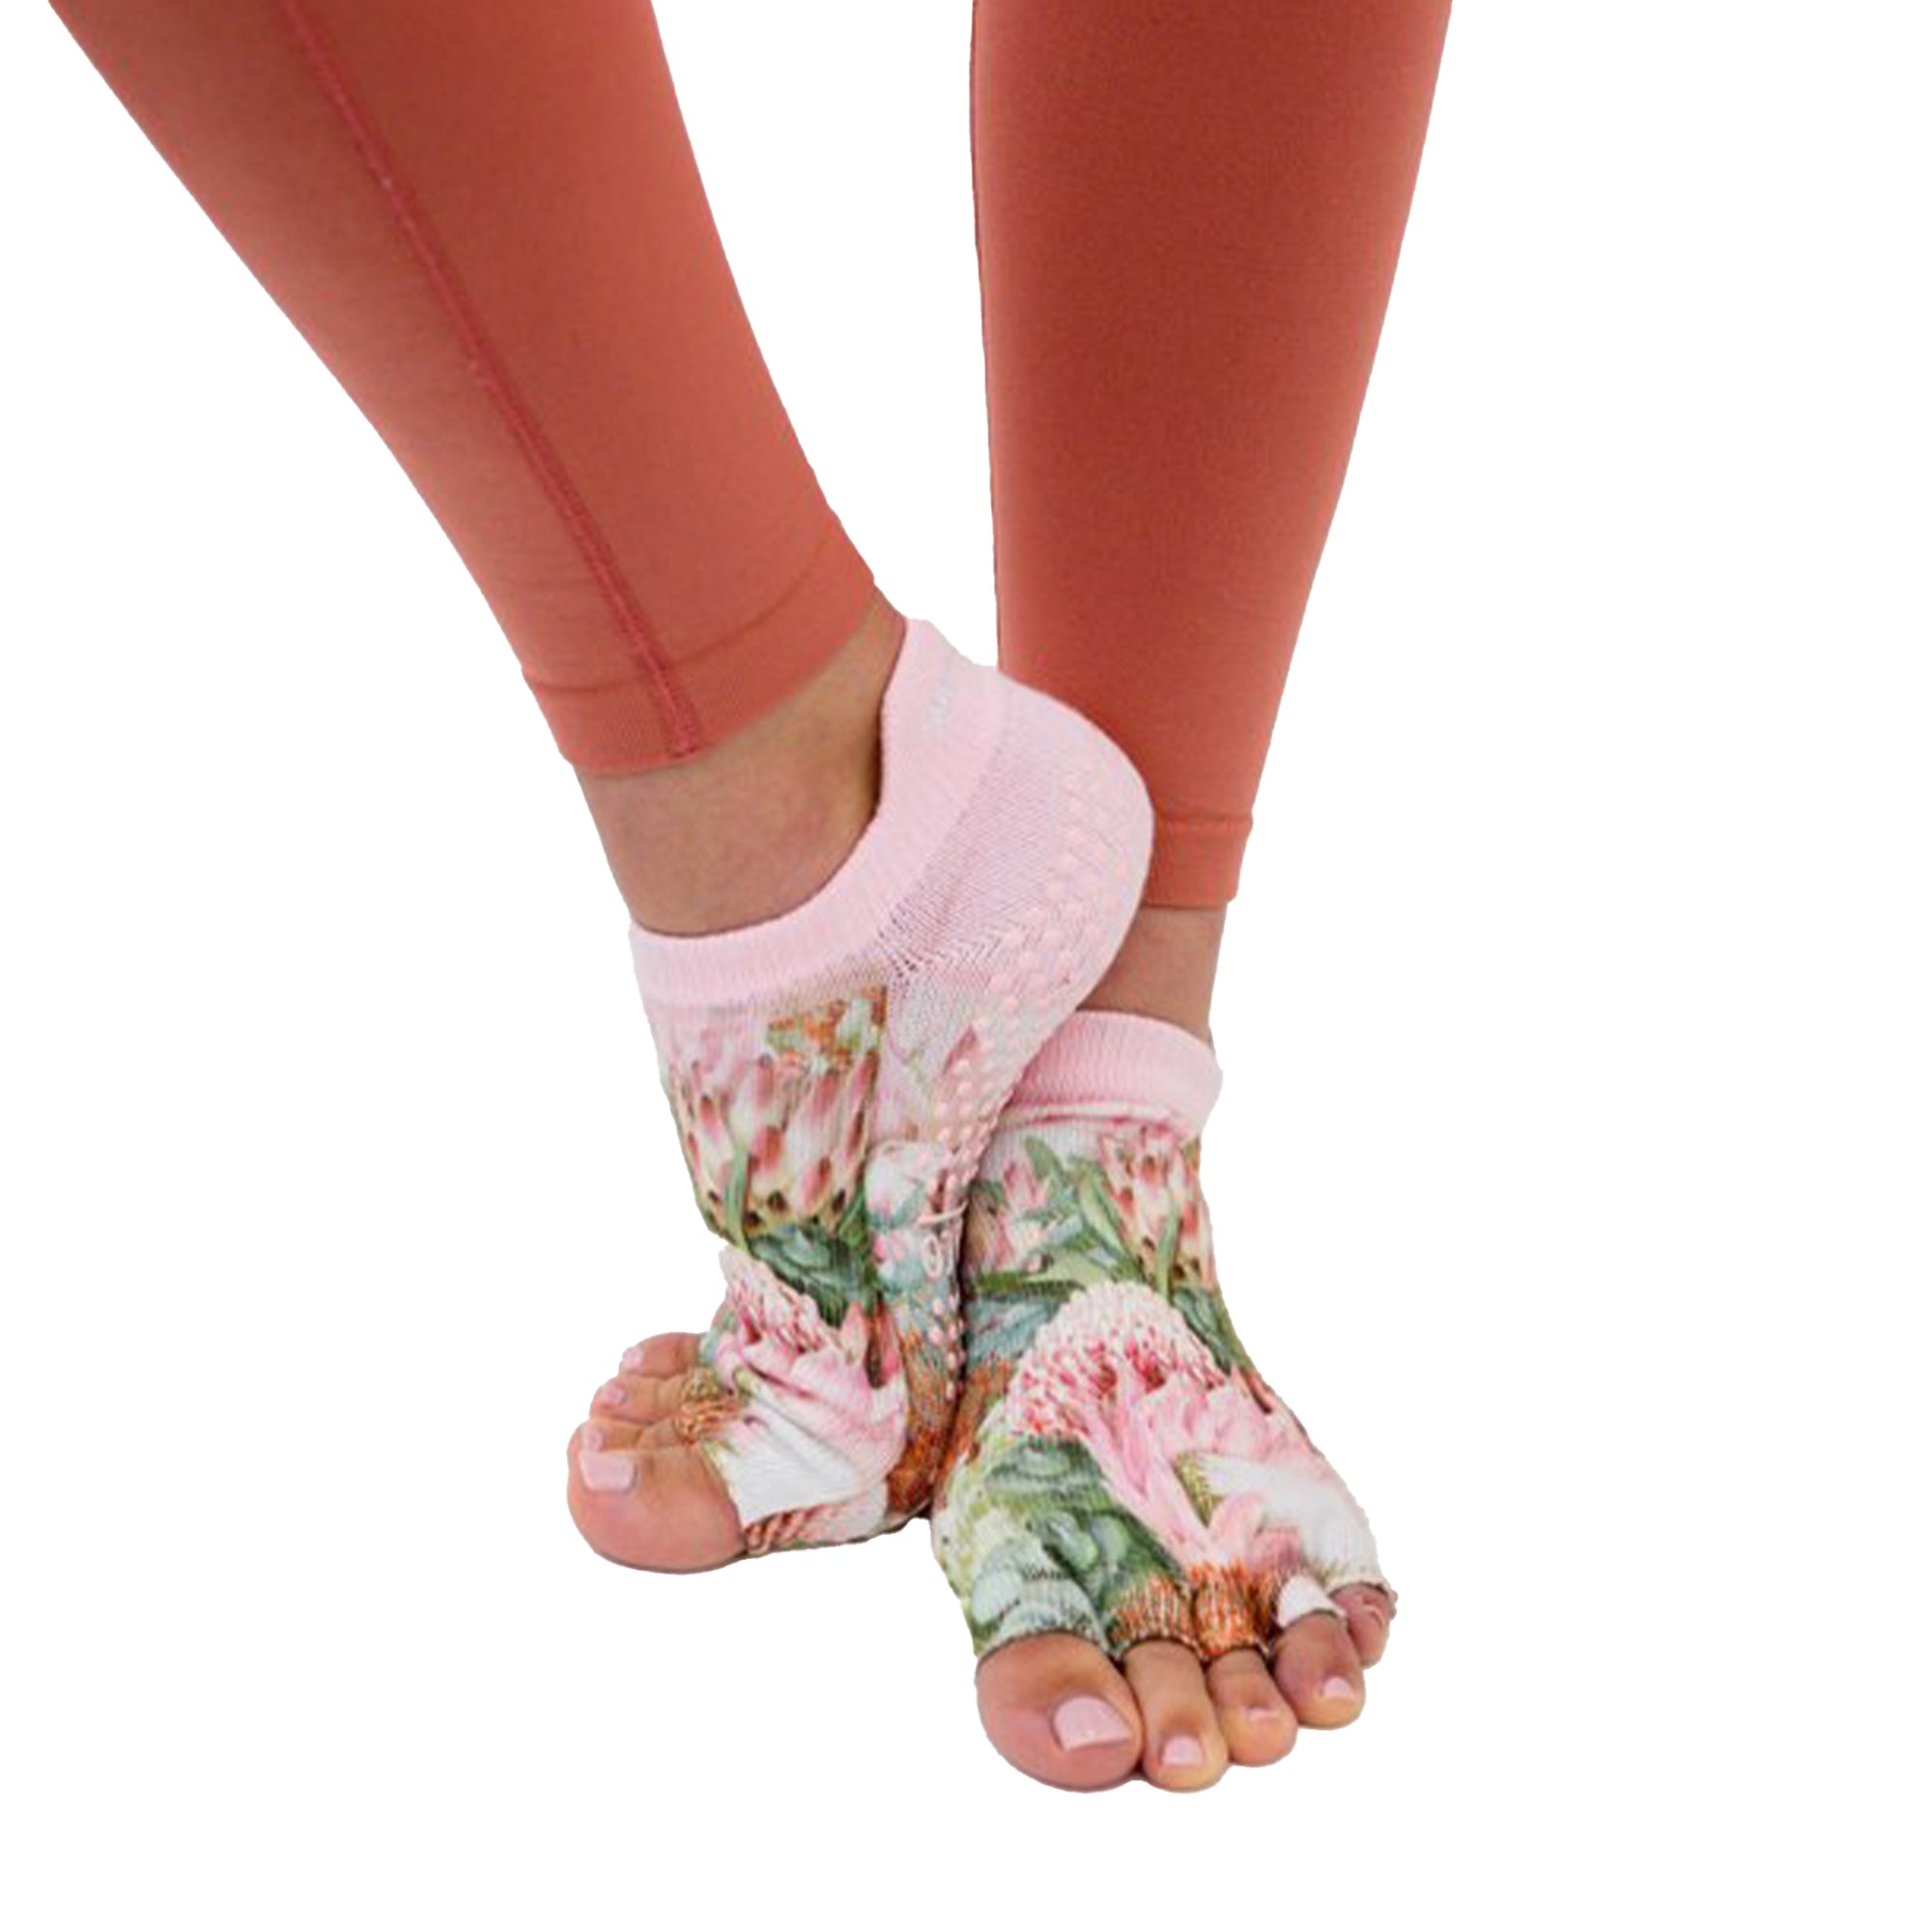 REFORMER *Grip socks closed-toe Required in Houston, TX, US